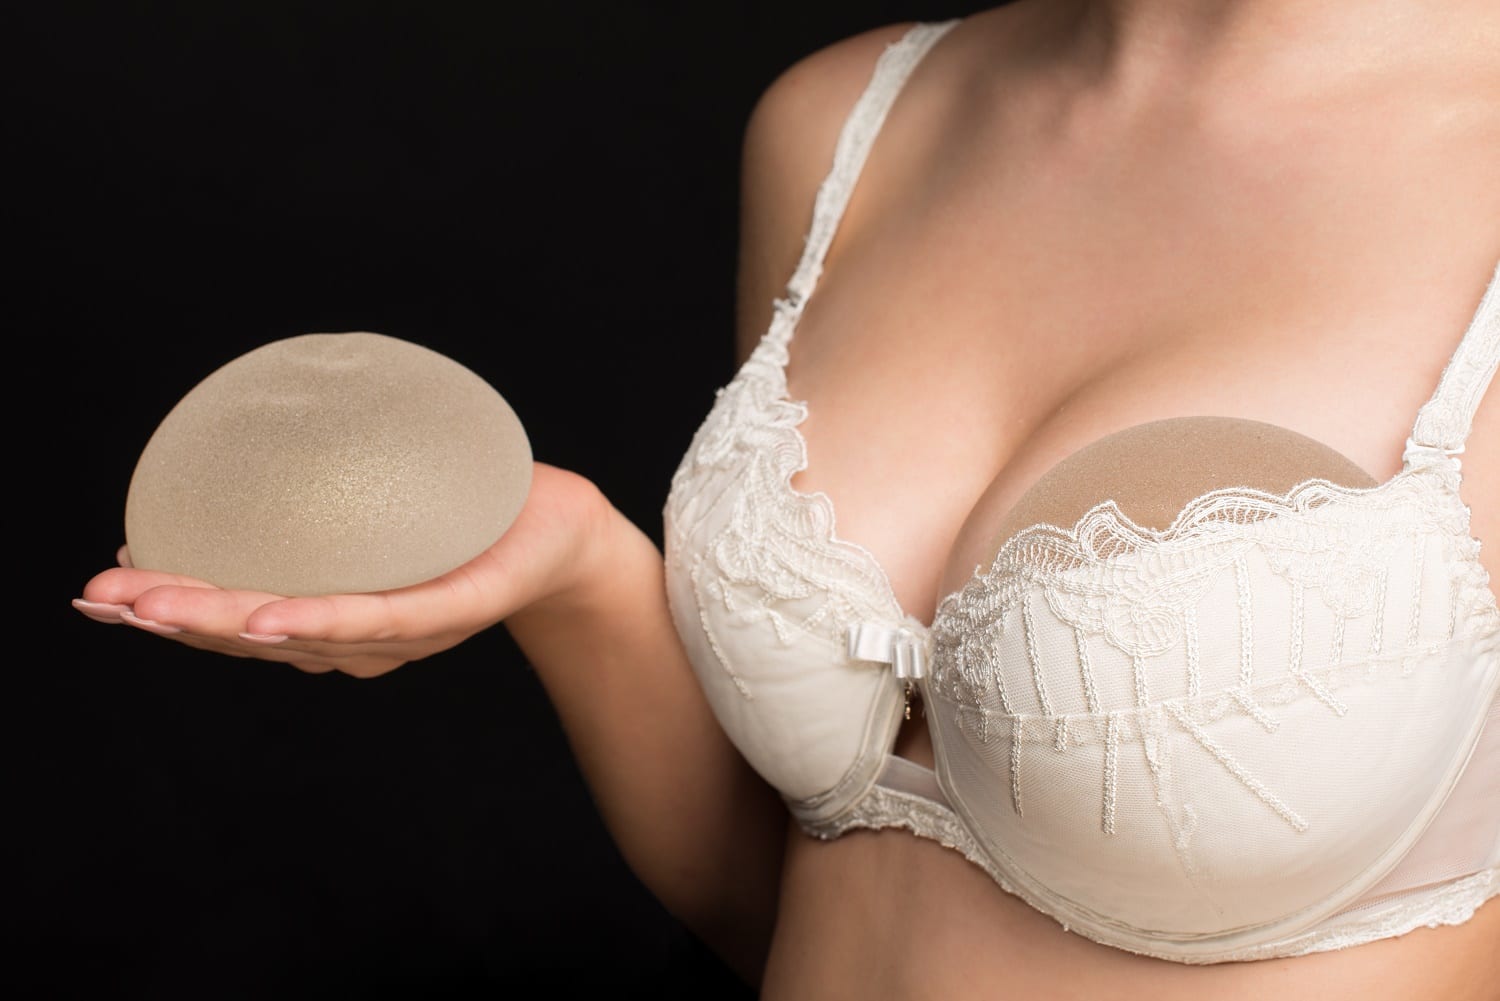 How Real Will Your Breast Implants Feel?